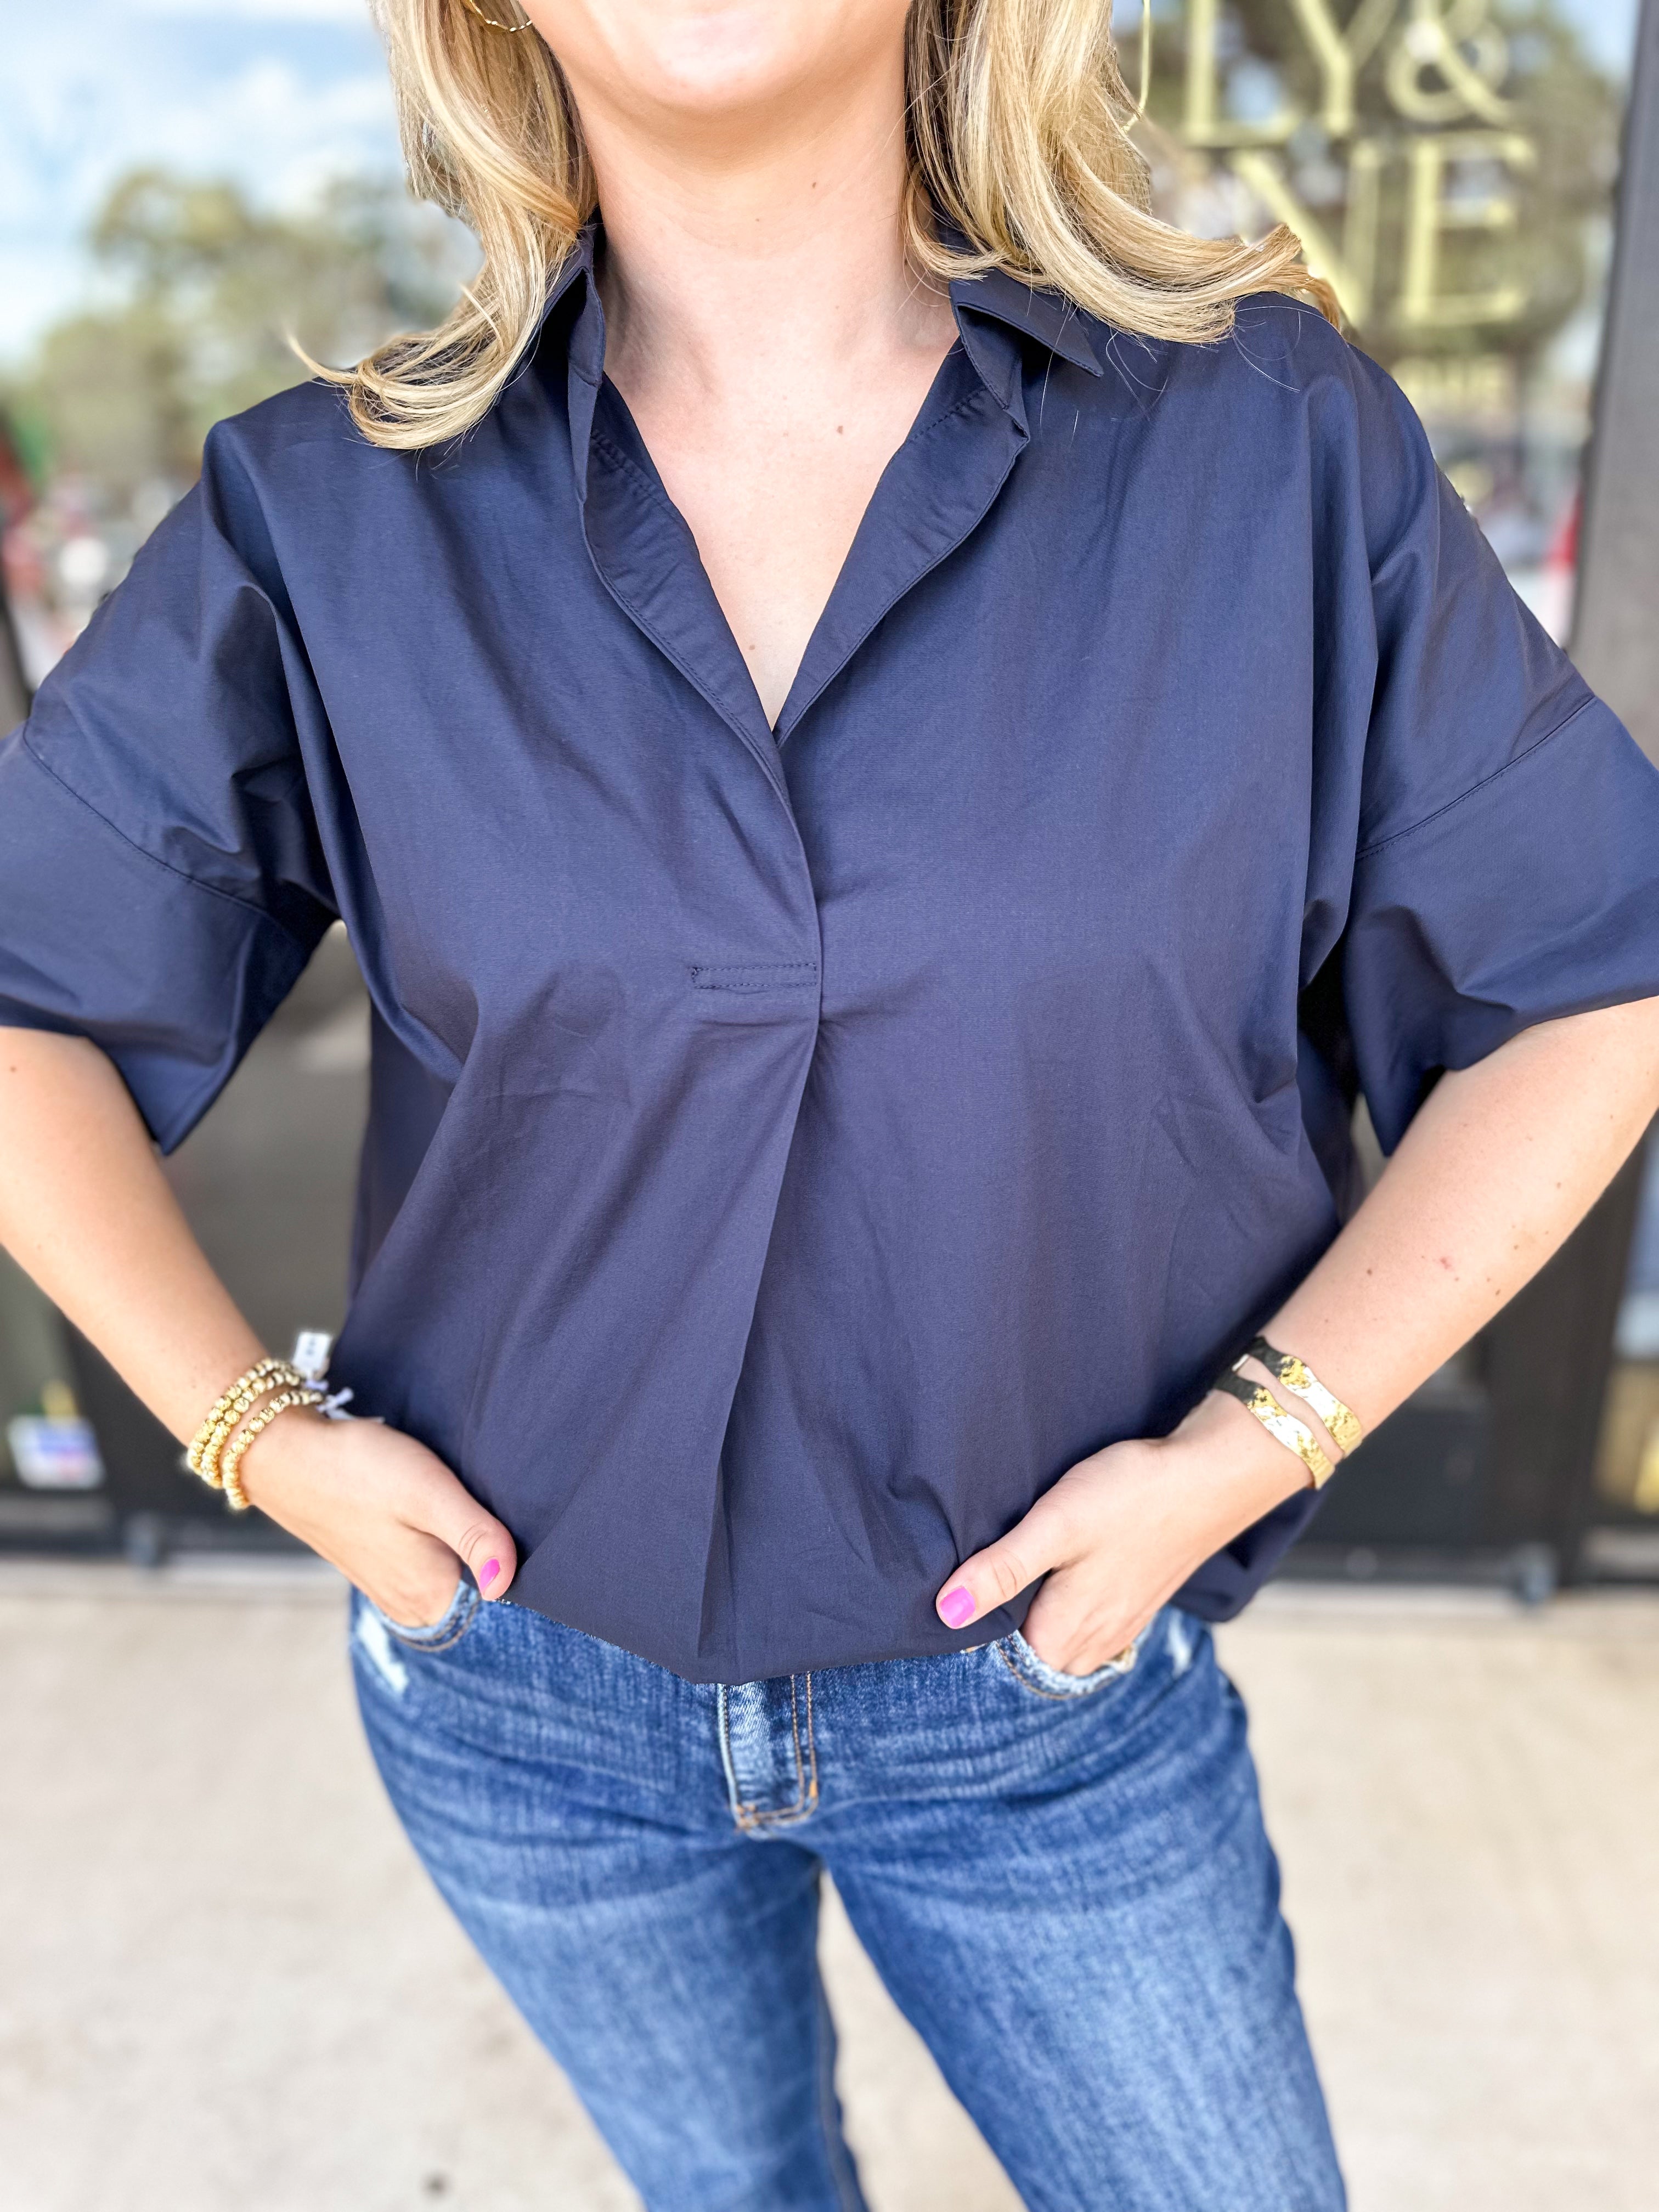 Collard Blouse - Ink-200 Fashion Blouses-PINCH-July & June Women's Fashion Boutique Located in San Antonio, Texas